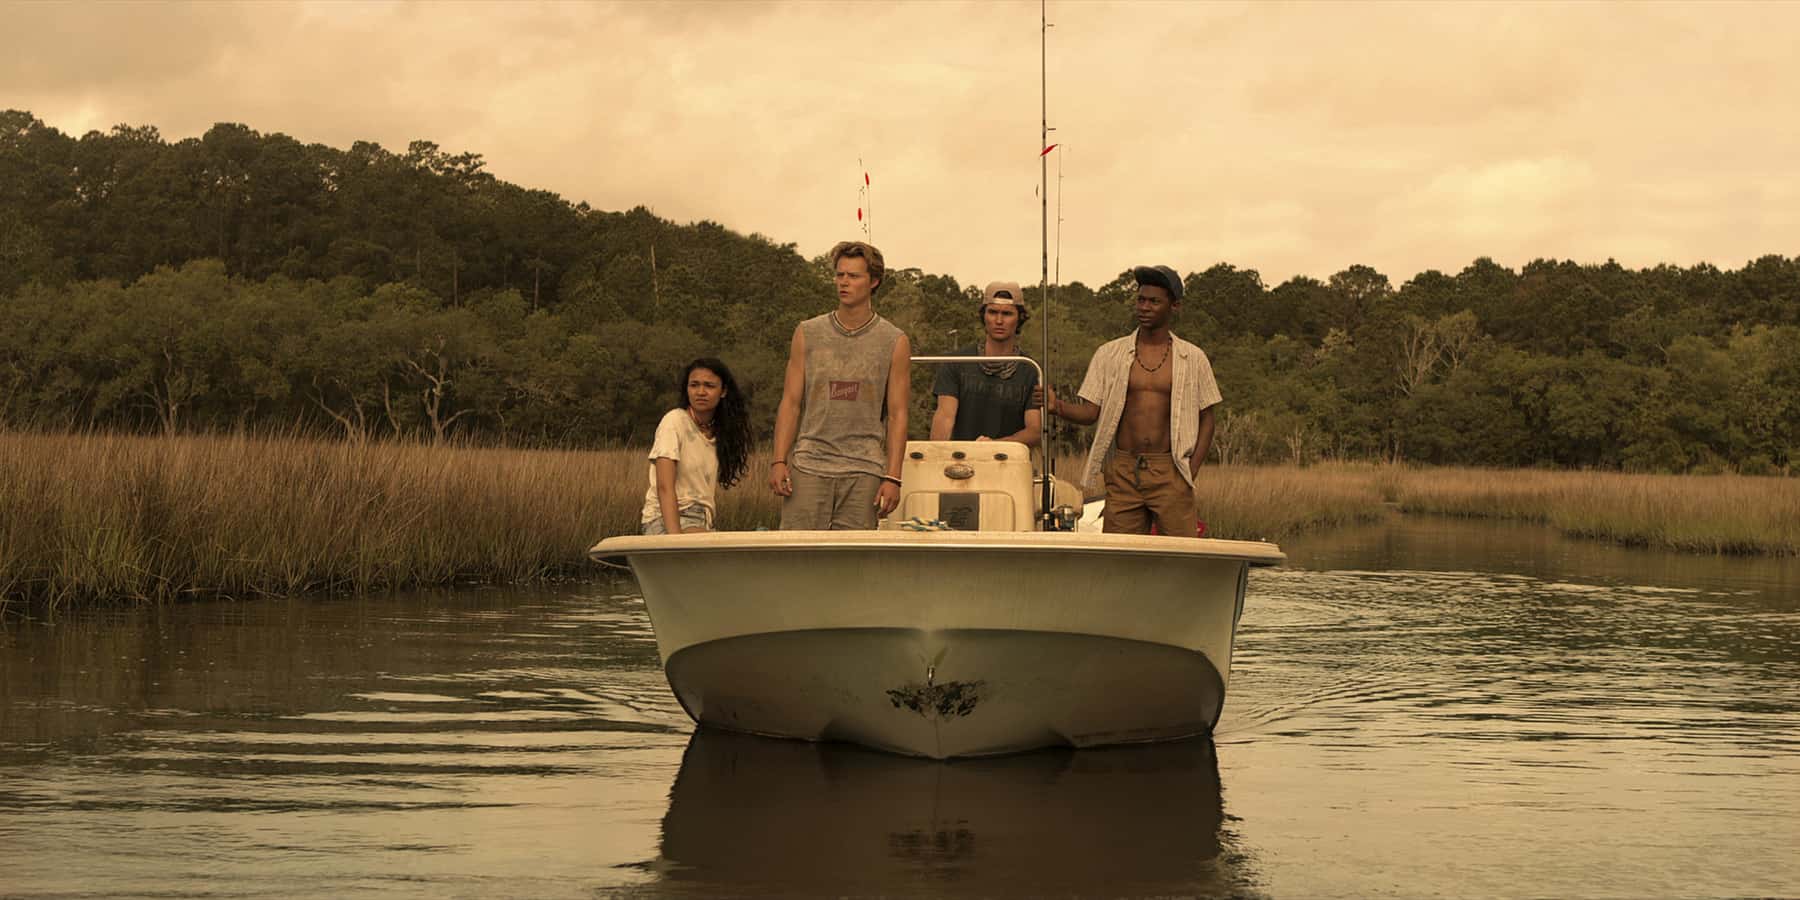 Madison Bailey, Rudy Pankow, Chase Stokes, and J.D. in this image from Red Canoe Productions